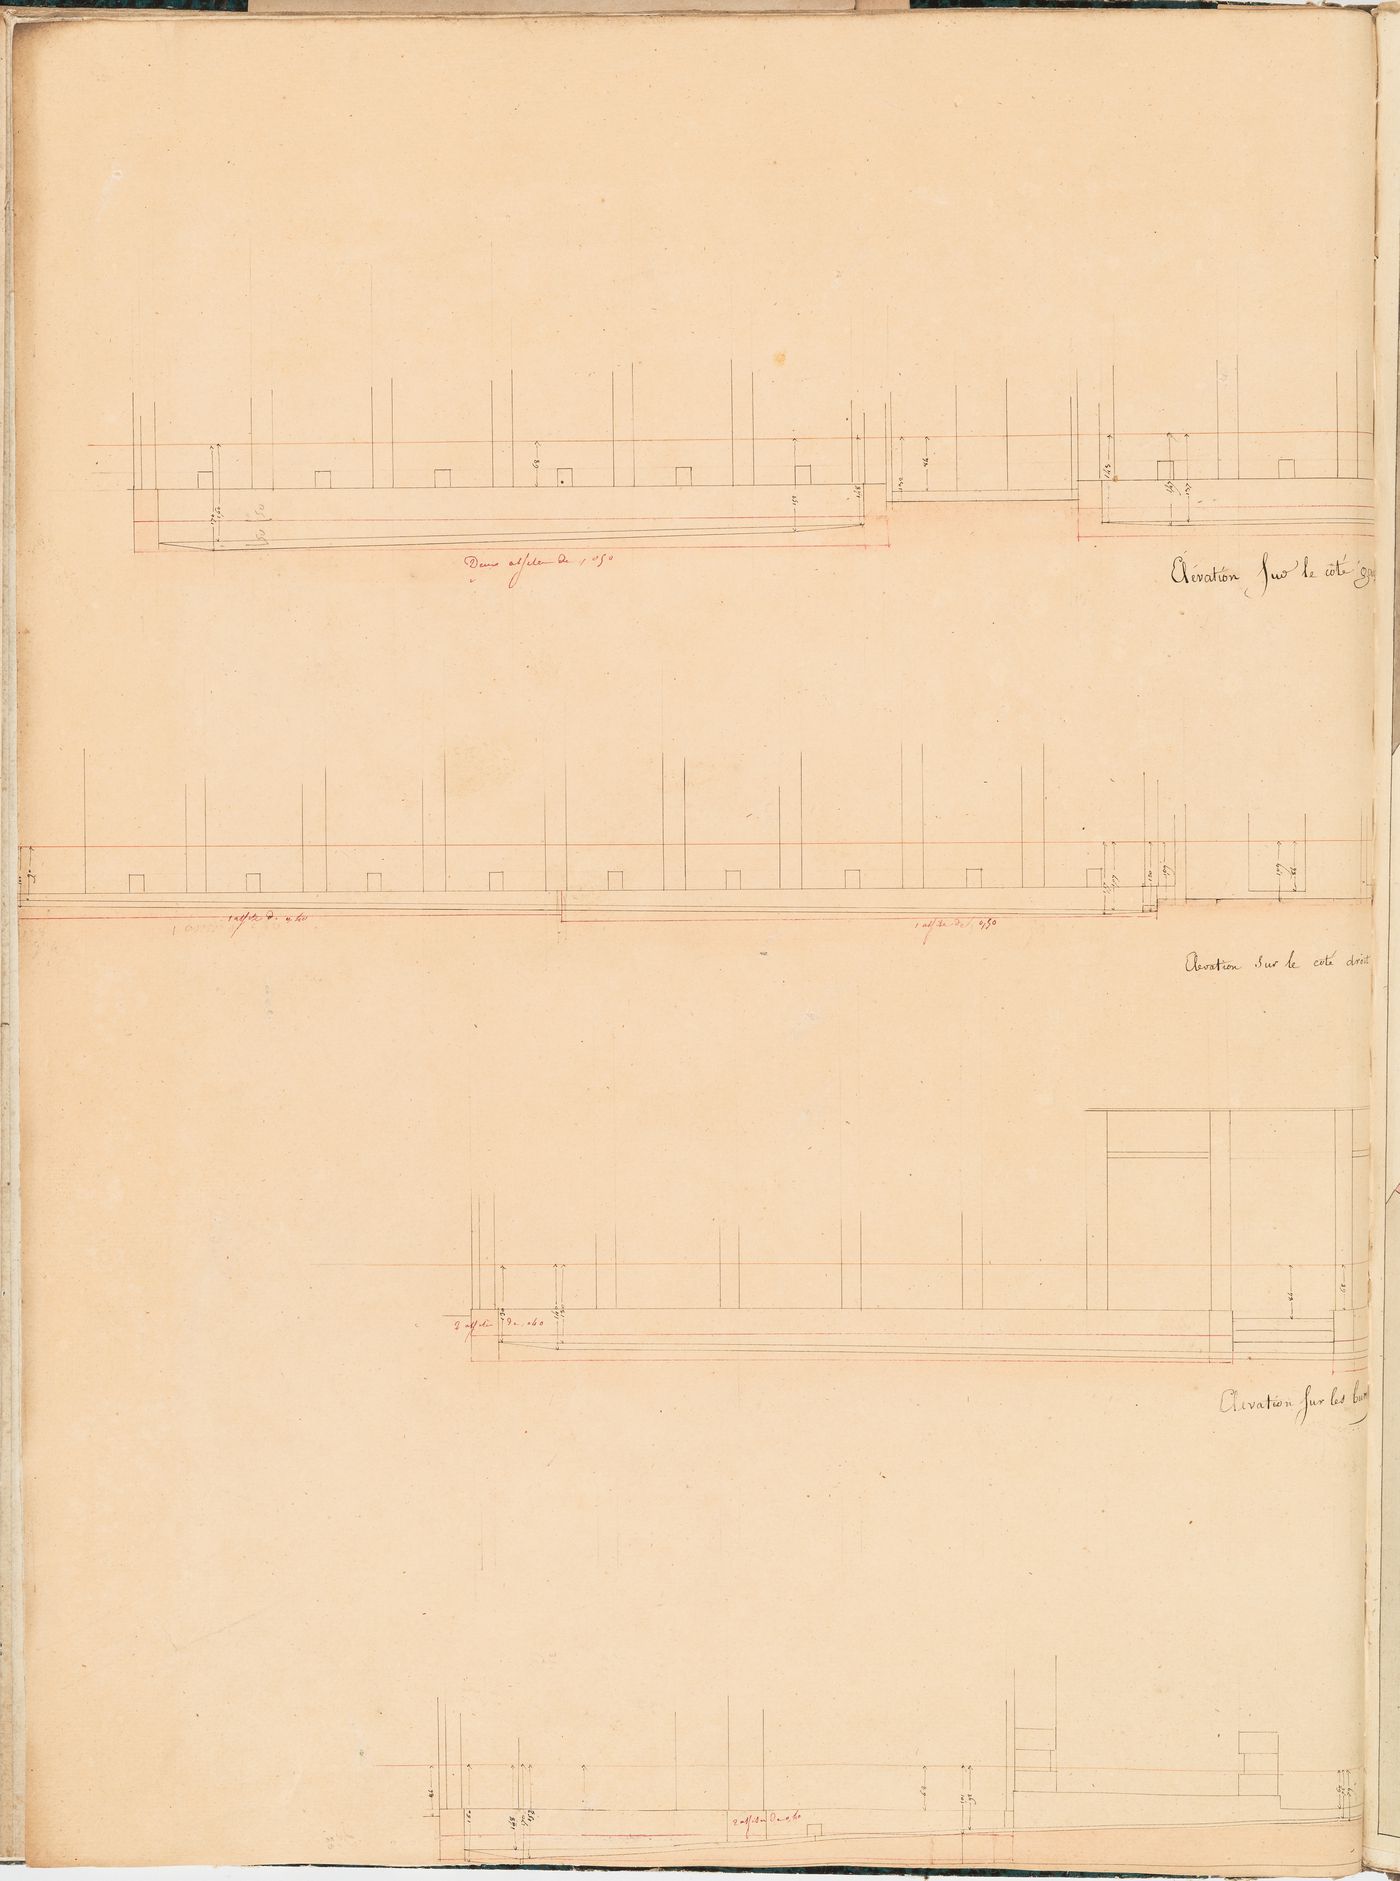 Elevations for an unidentified building